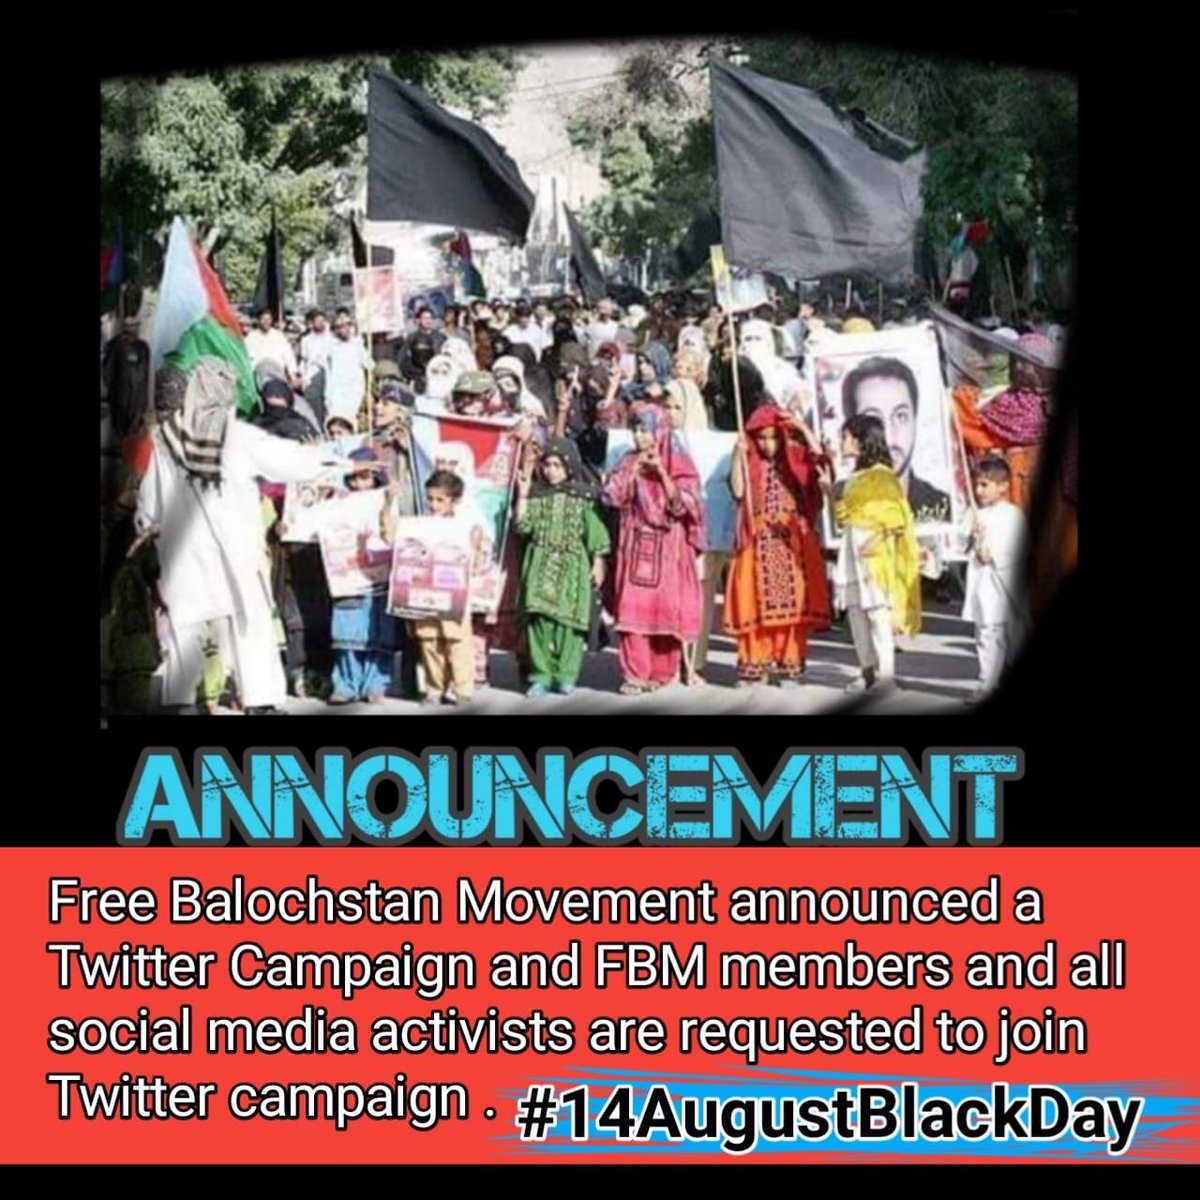 Requested to all #Indian brothers and sisters to join the Free Balochistan Movement online campaign and use the Hashtag #14AugustBlackDay and show your solidarity and friendship. #DownWithPakistan